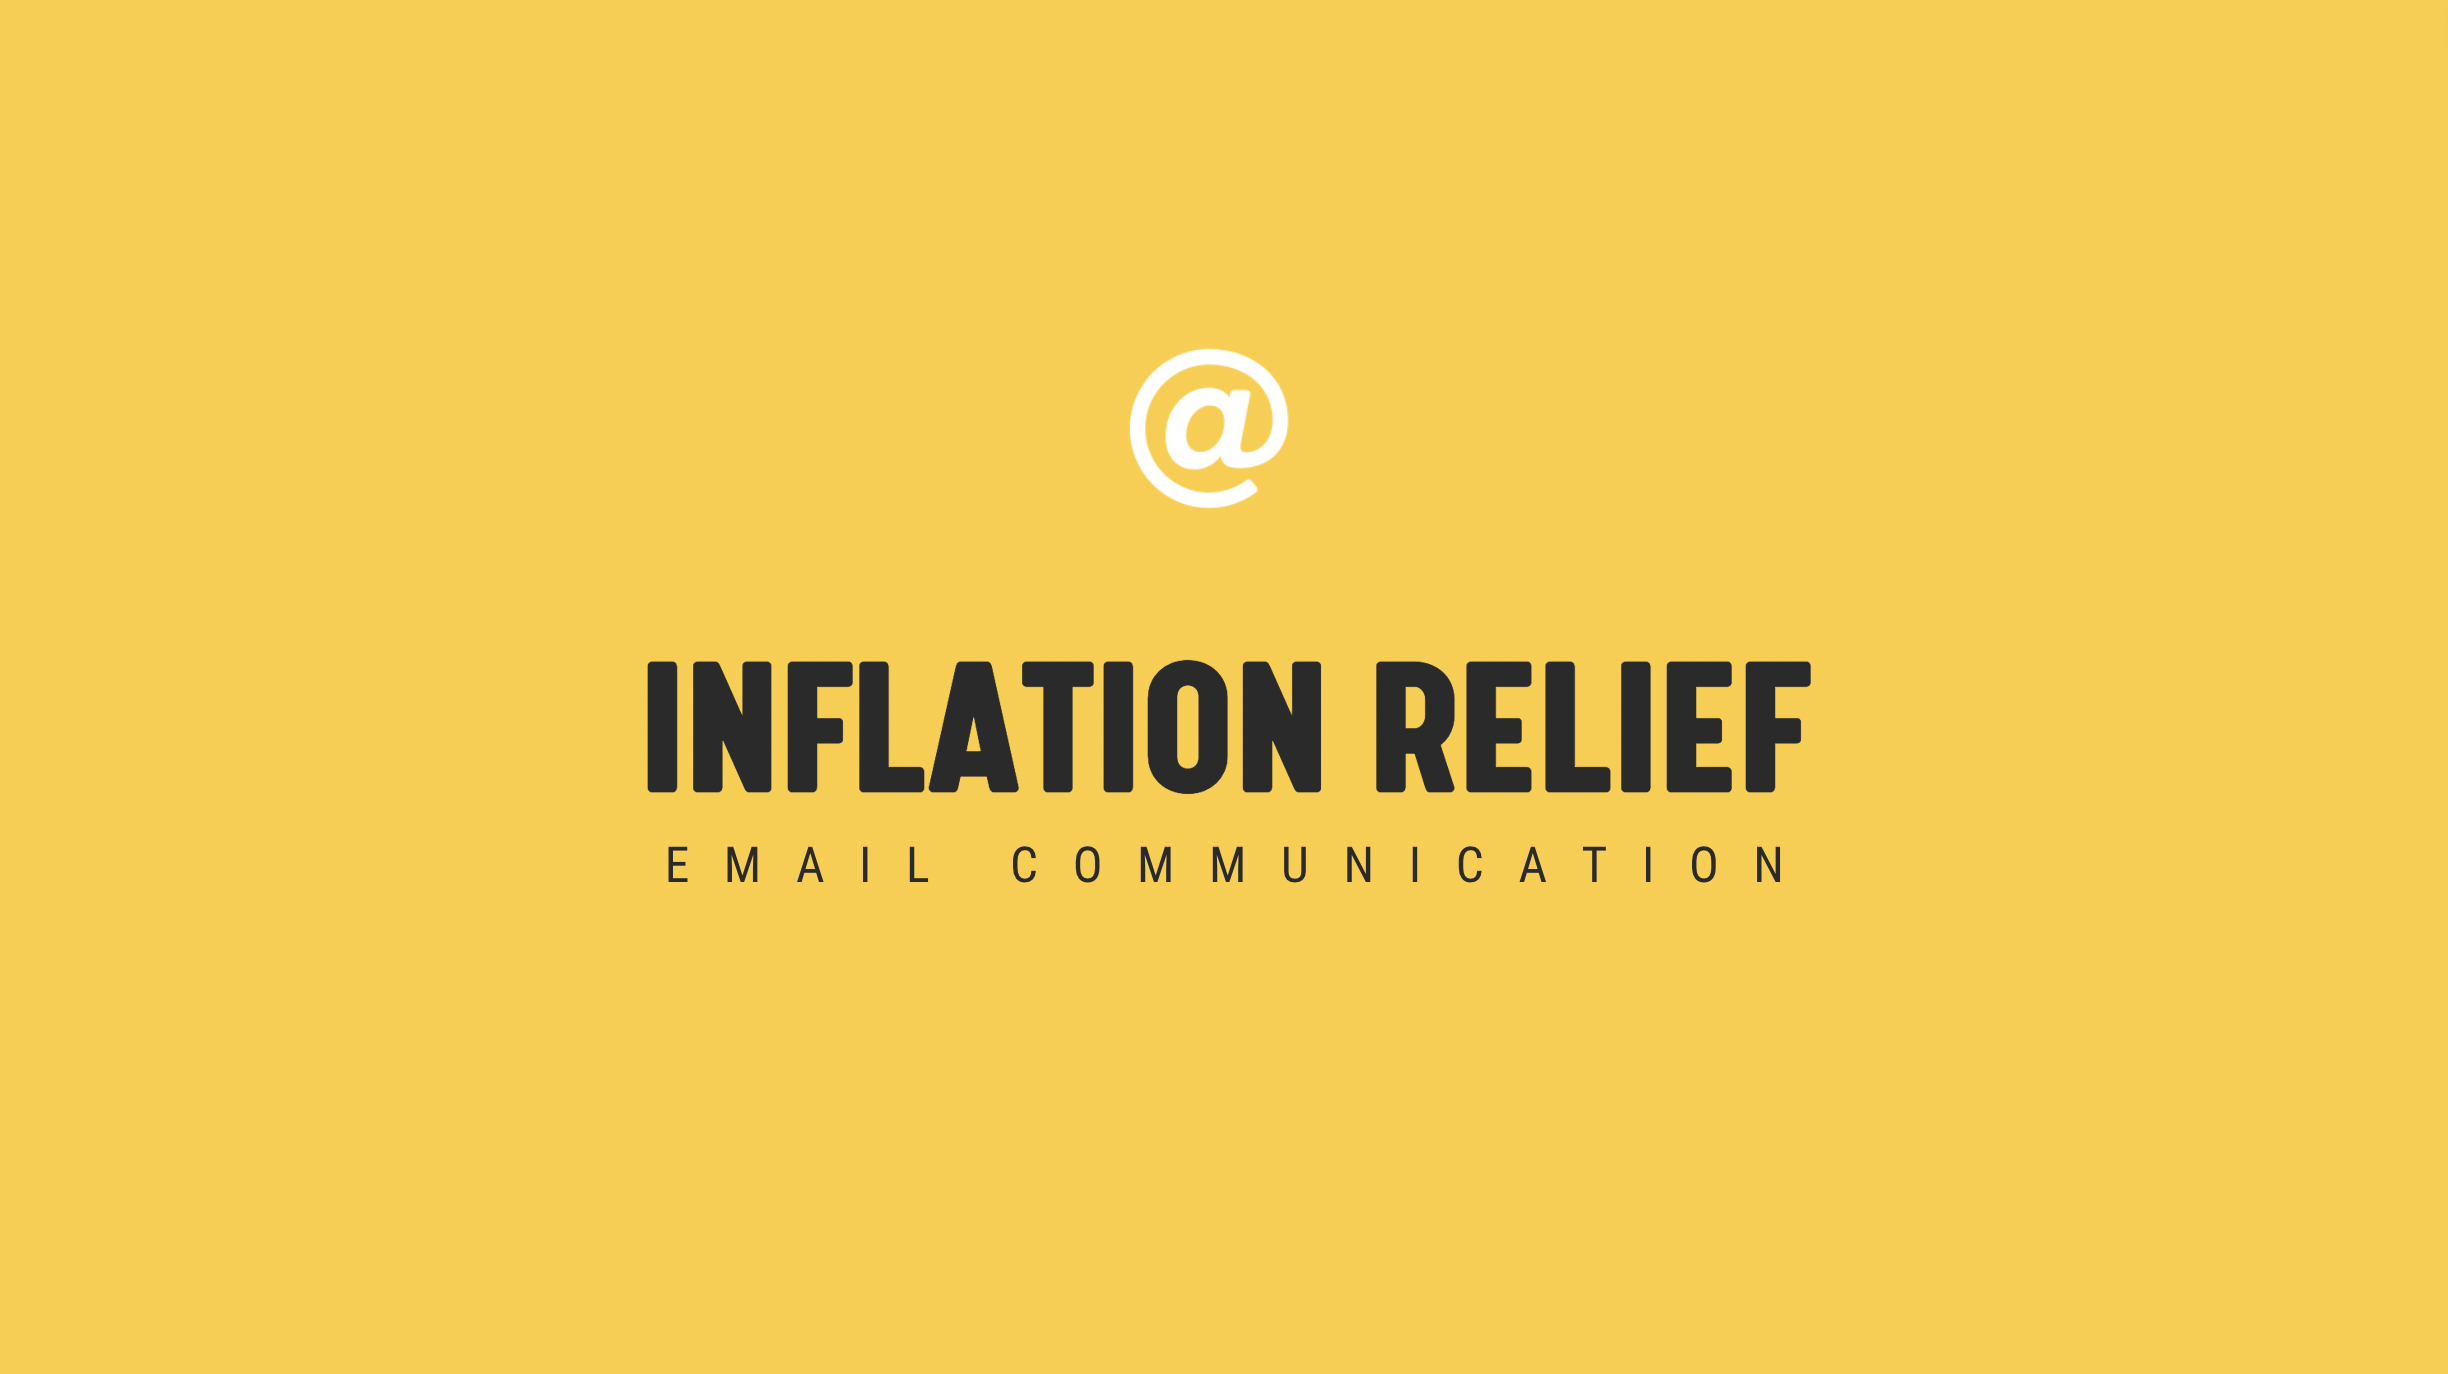 [NEW] Inflation Relief - Timely Email